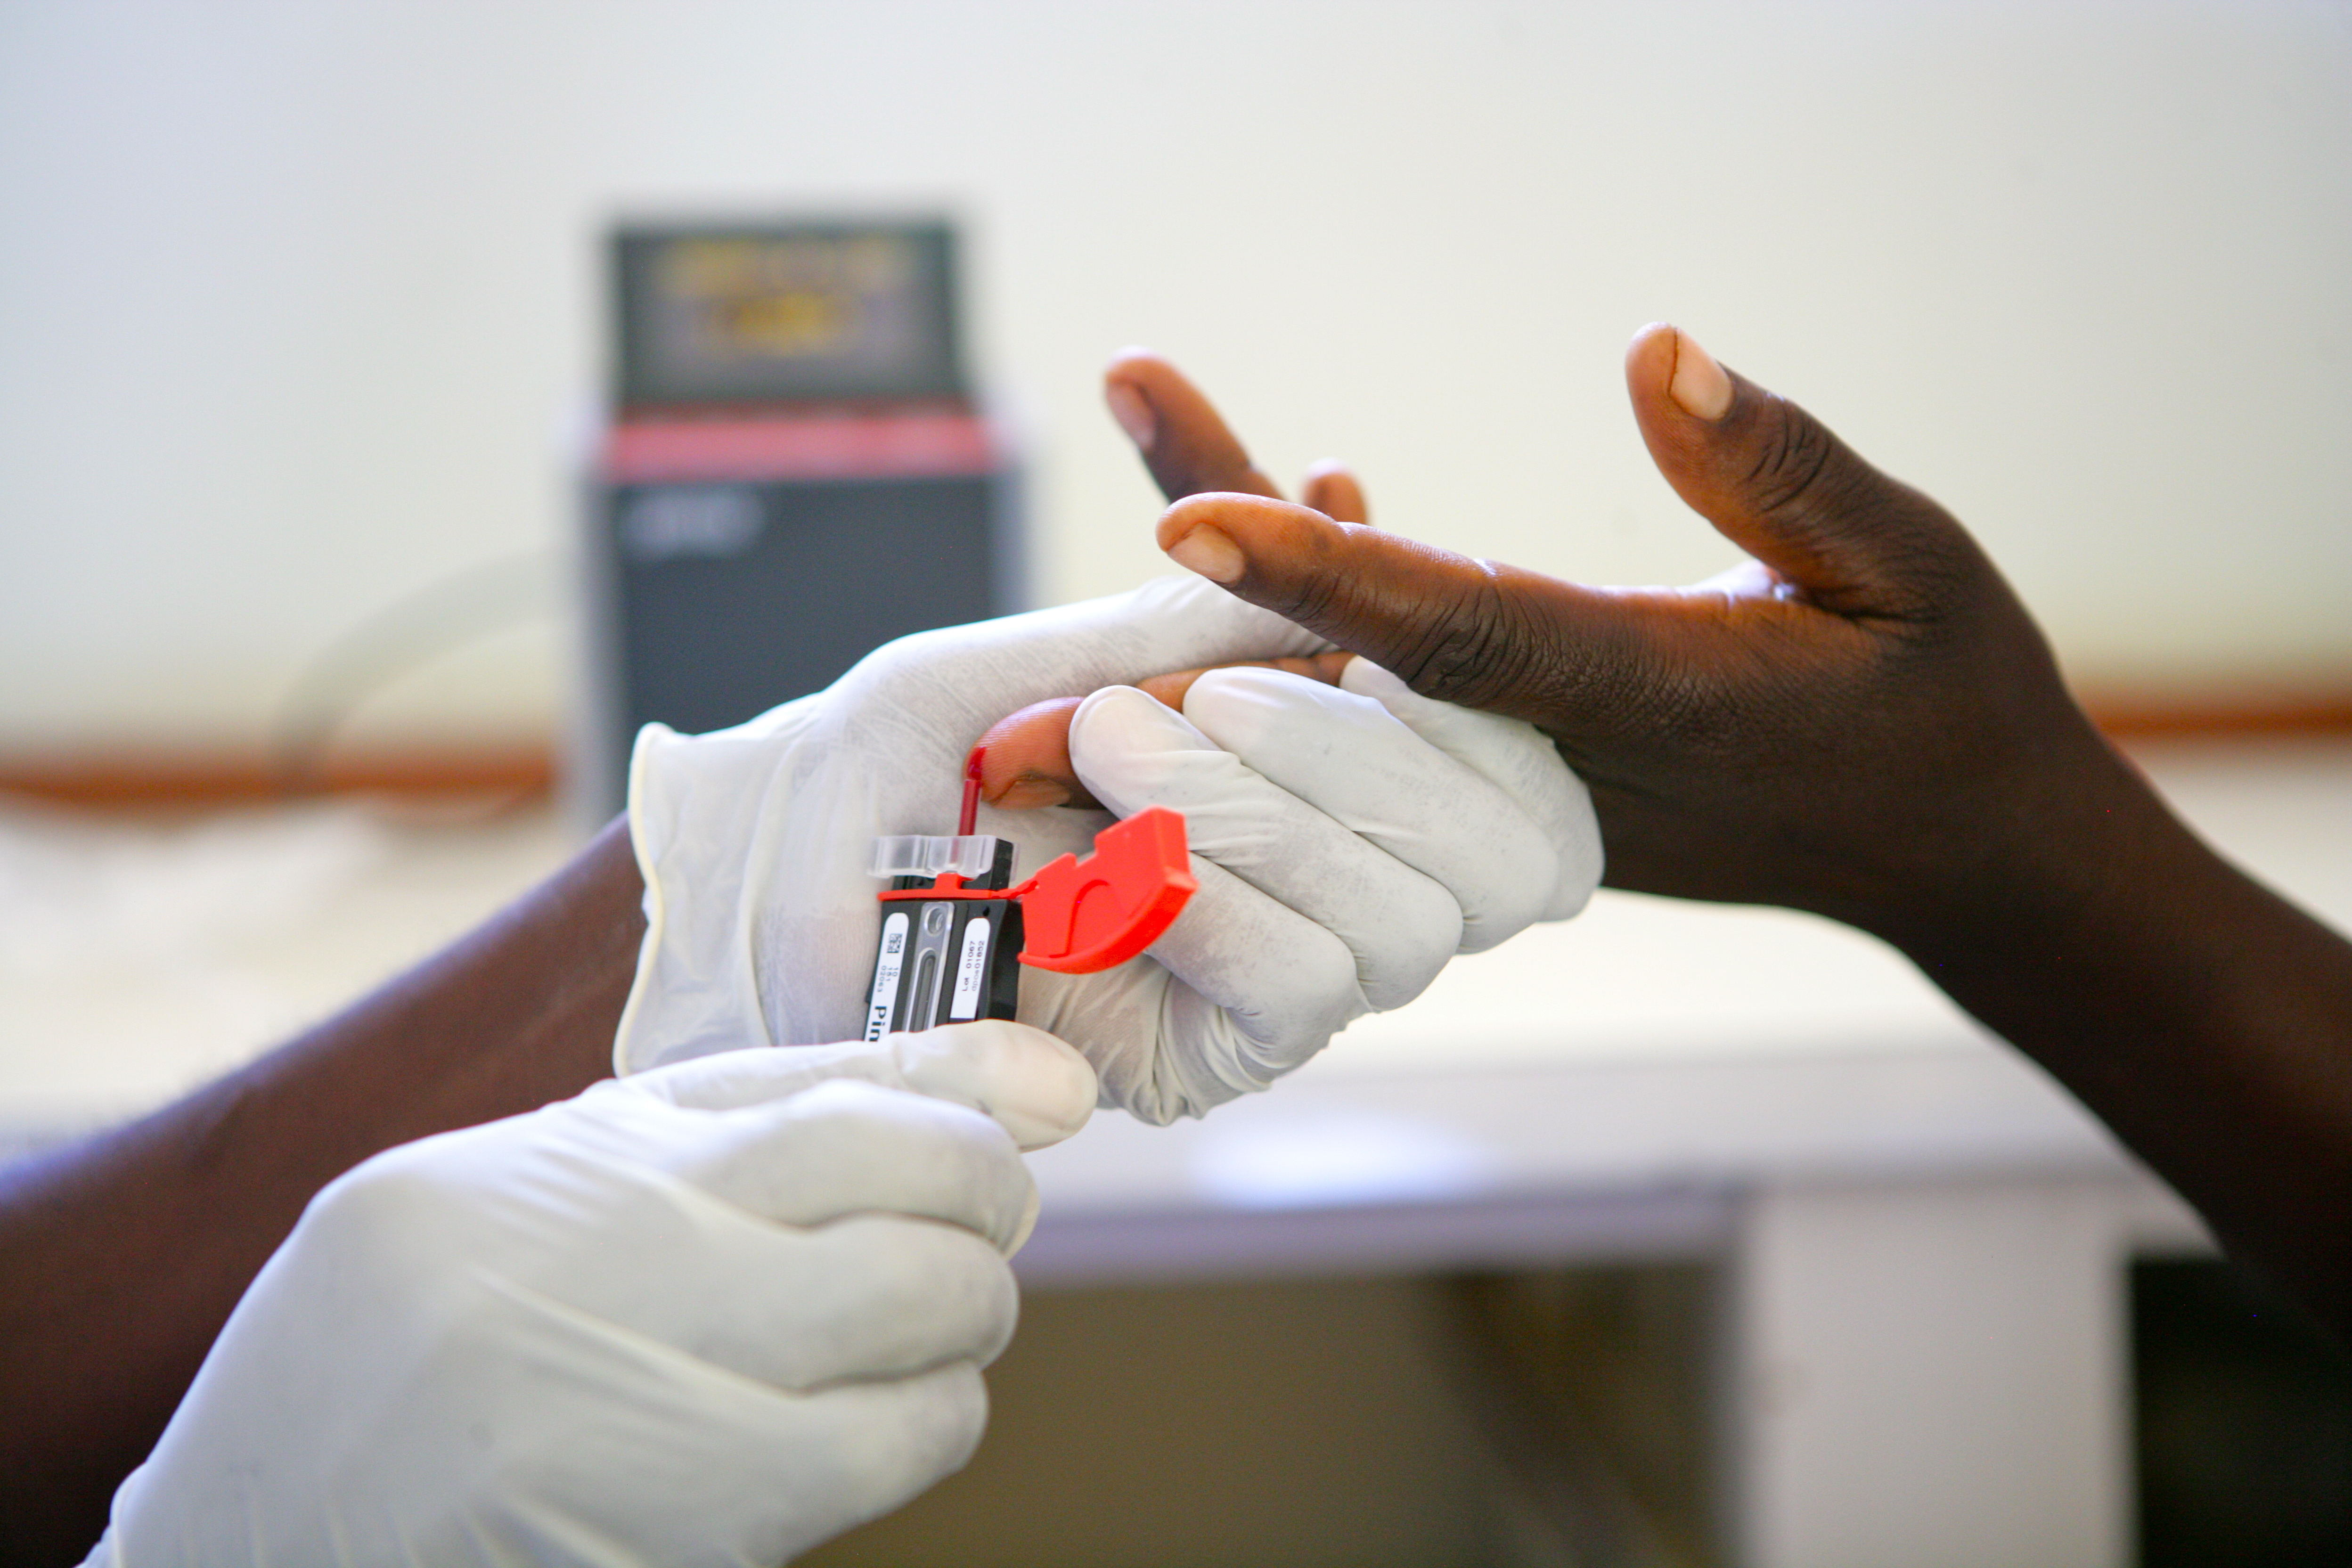 Image of collecting blood for HIV rapid test in Zimbabwe (©UNICEF/UNI106377/Pirozzi)